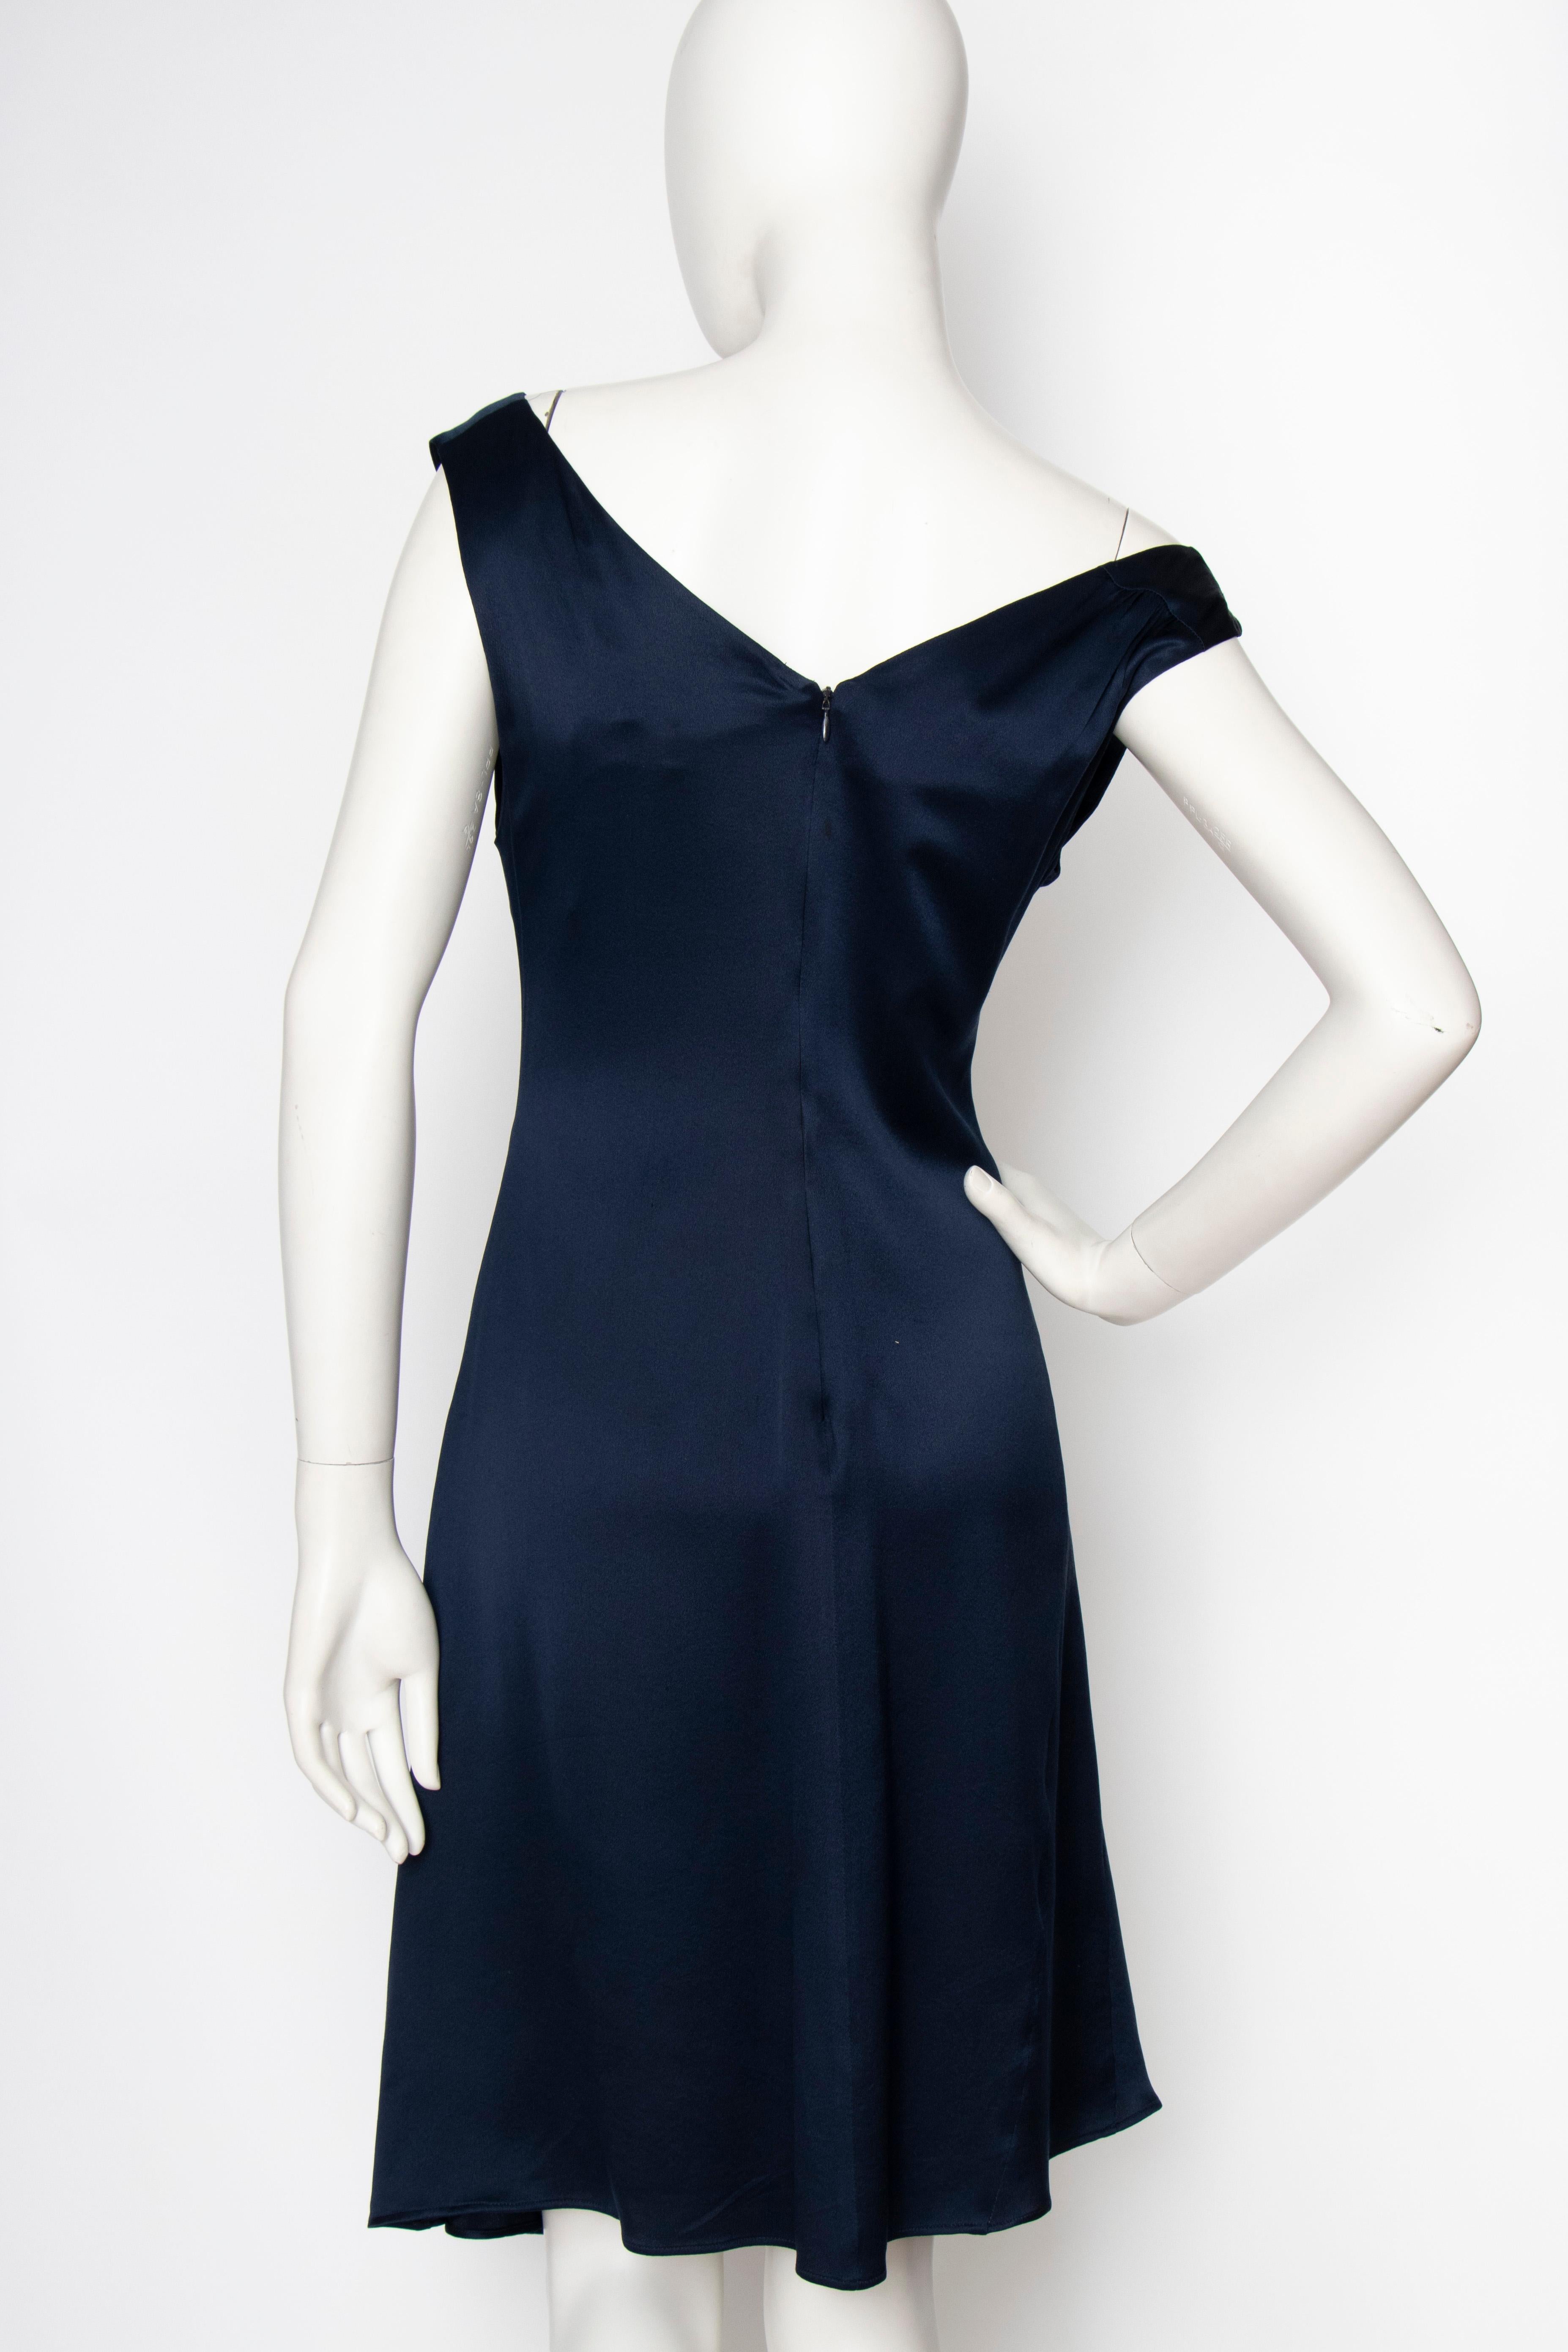 A 2000s Vintage Christian Dior by John Galliano Silk Dress  In Good Condition For Sale In Copenhagen, DK